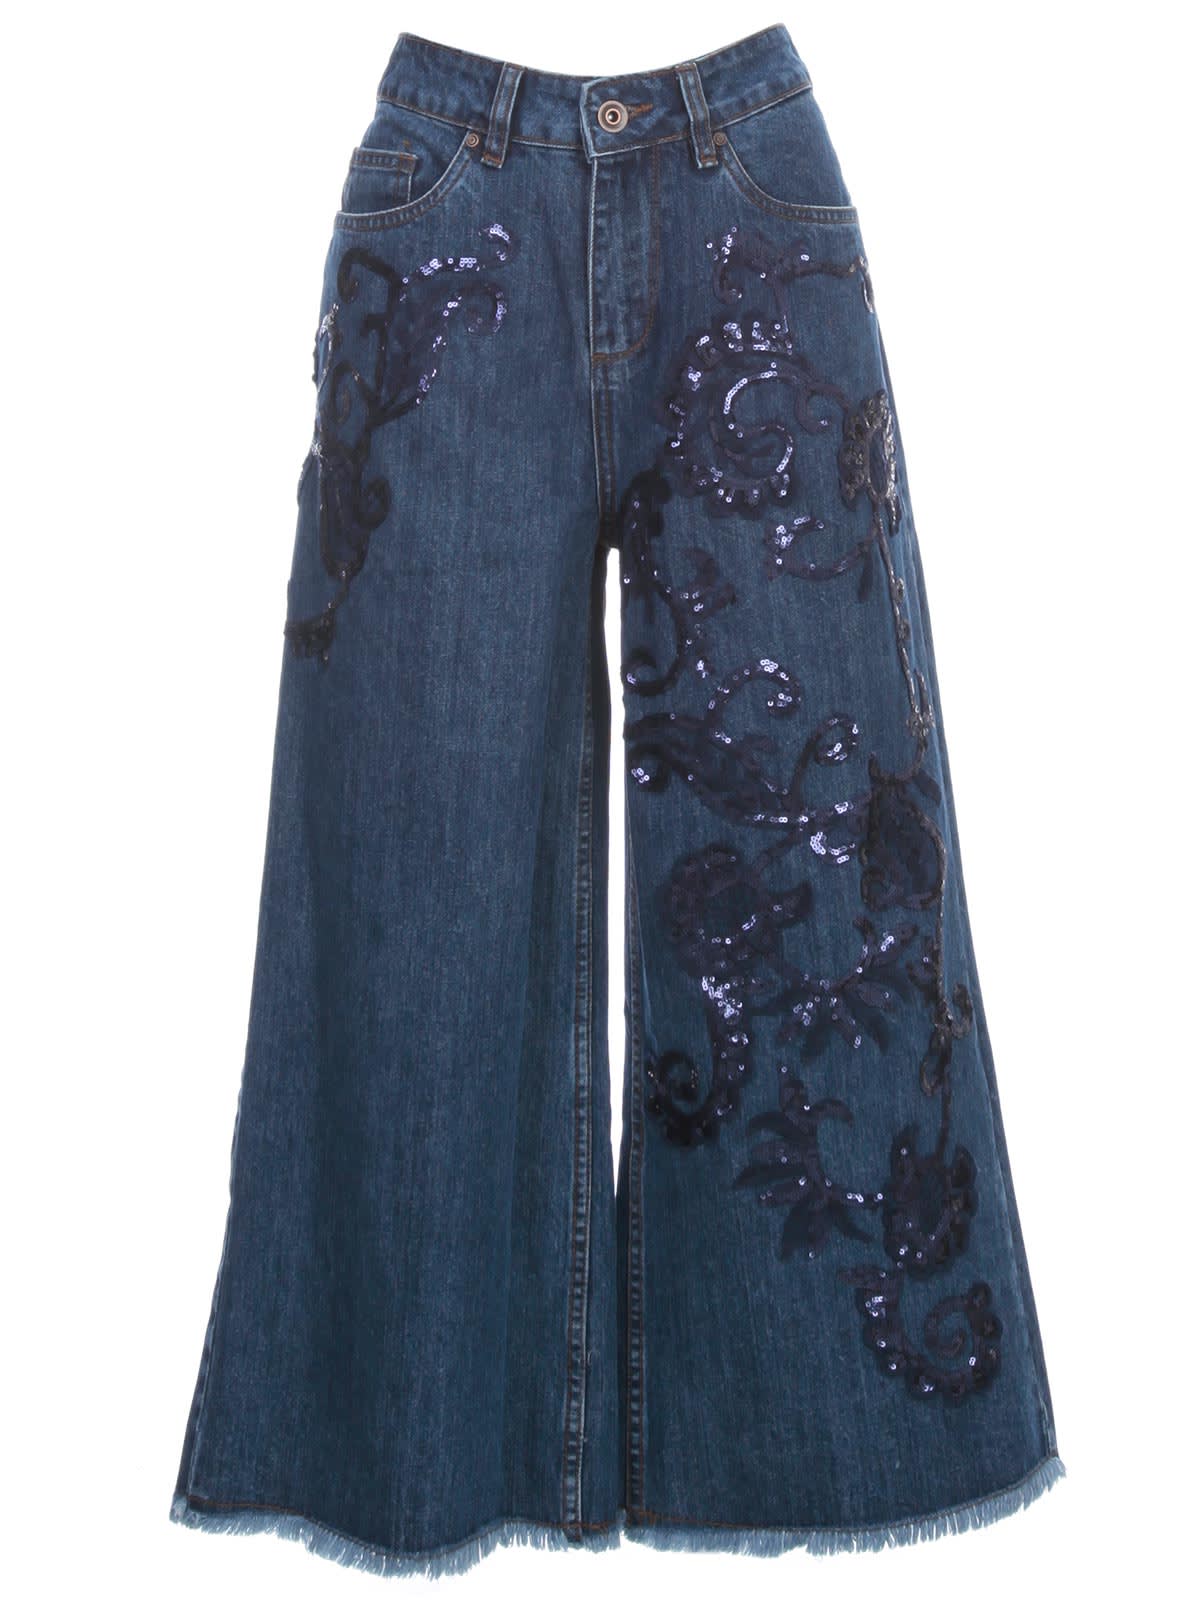 ANTONIO MARRAS GEORGE JEANS CROPPED W/EMBRODERY AND LOGO BEHIND,11210203